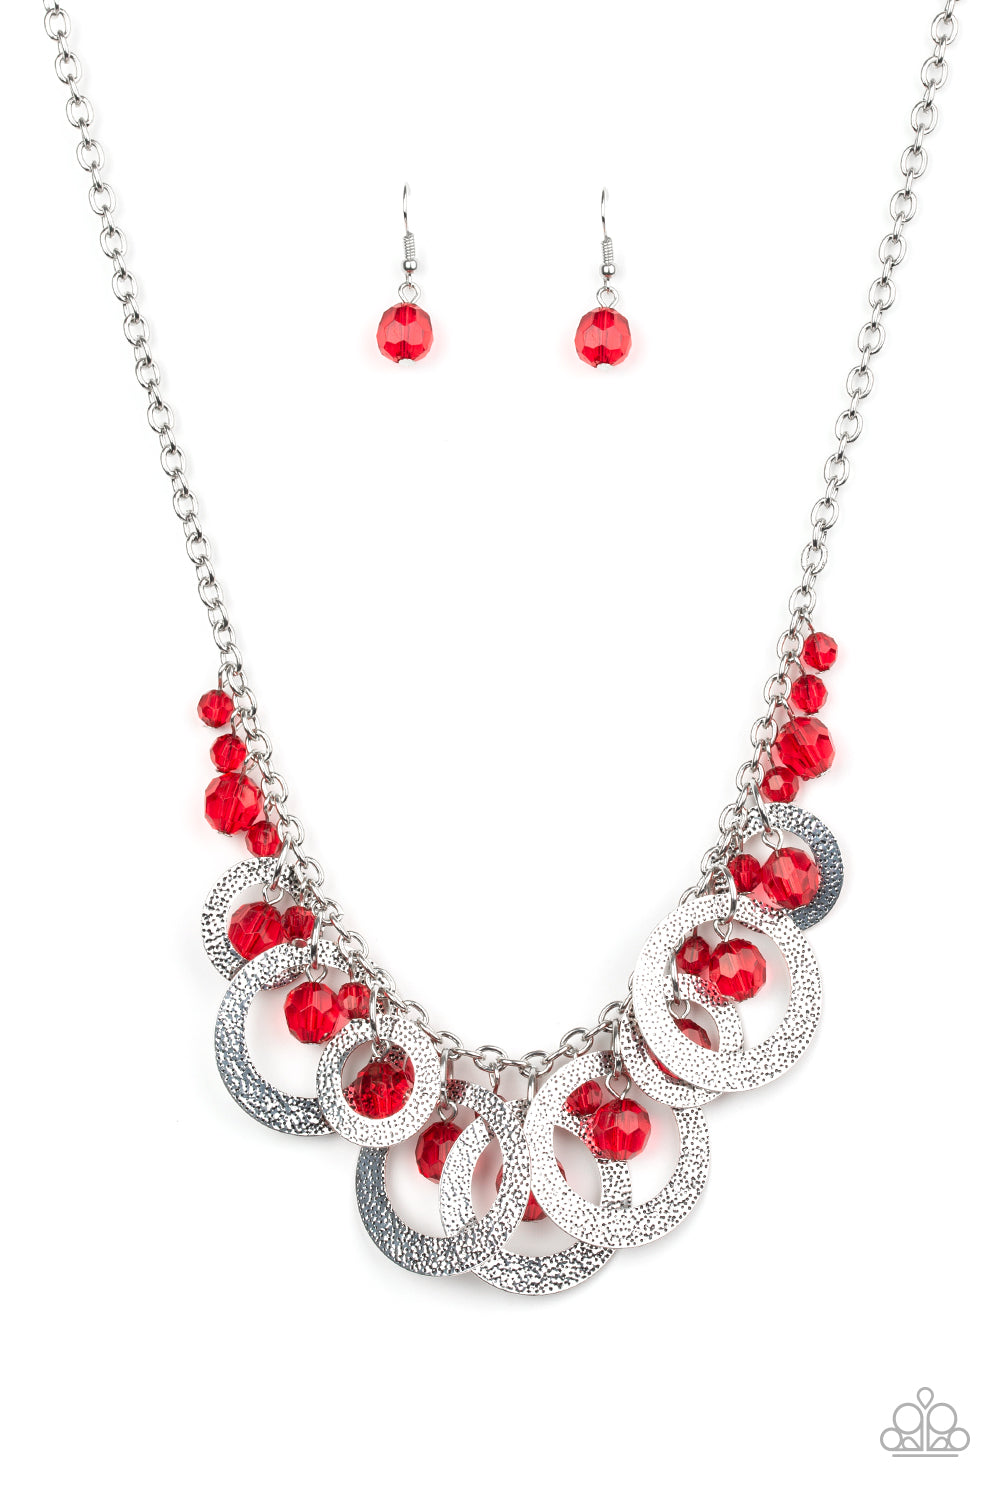 Turn It Up - red - Paparazzi necklace